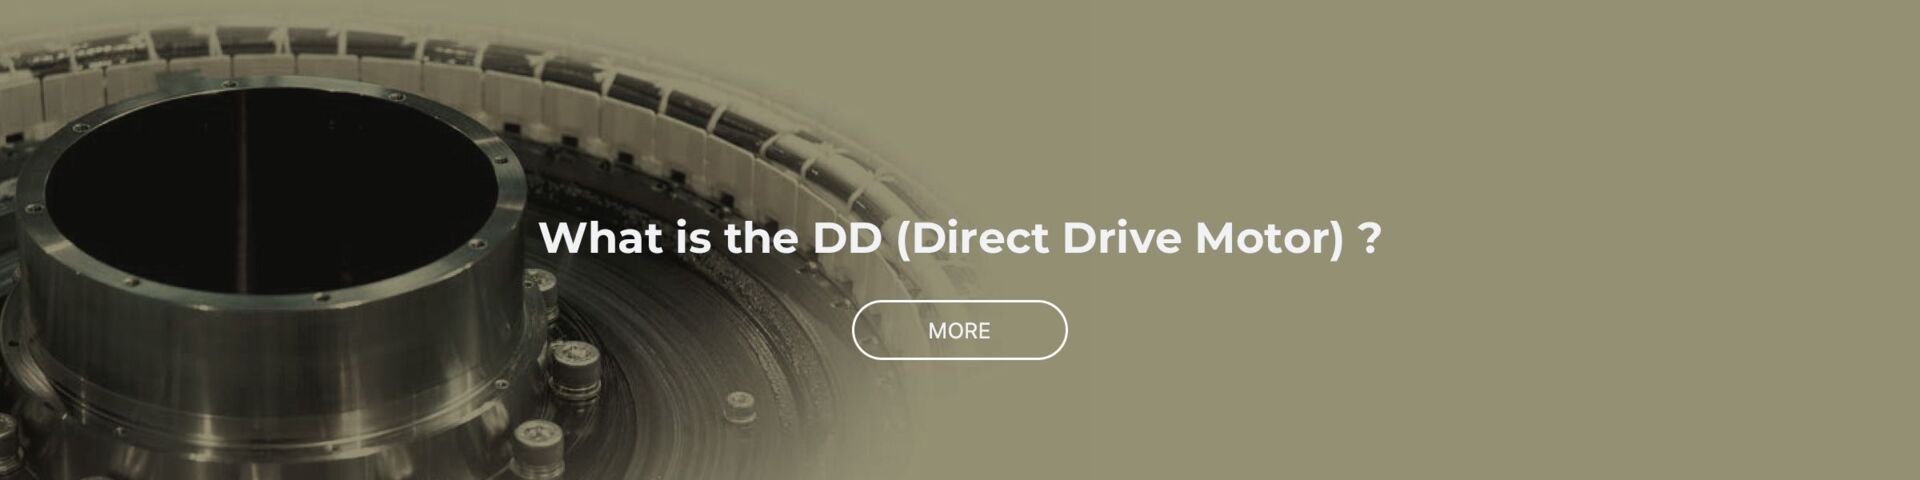 What is the DD (Direct Drive Motor) ?